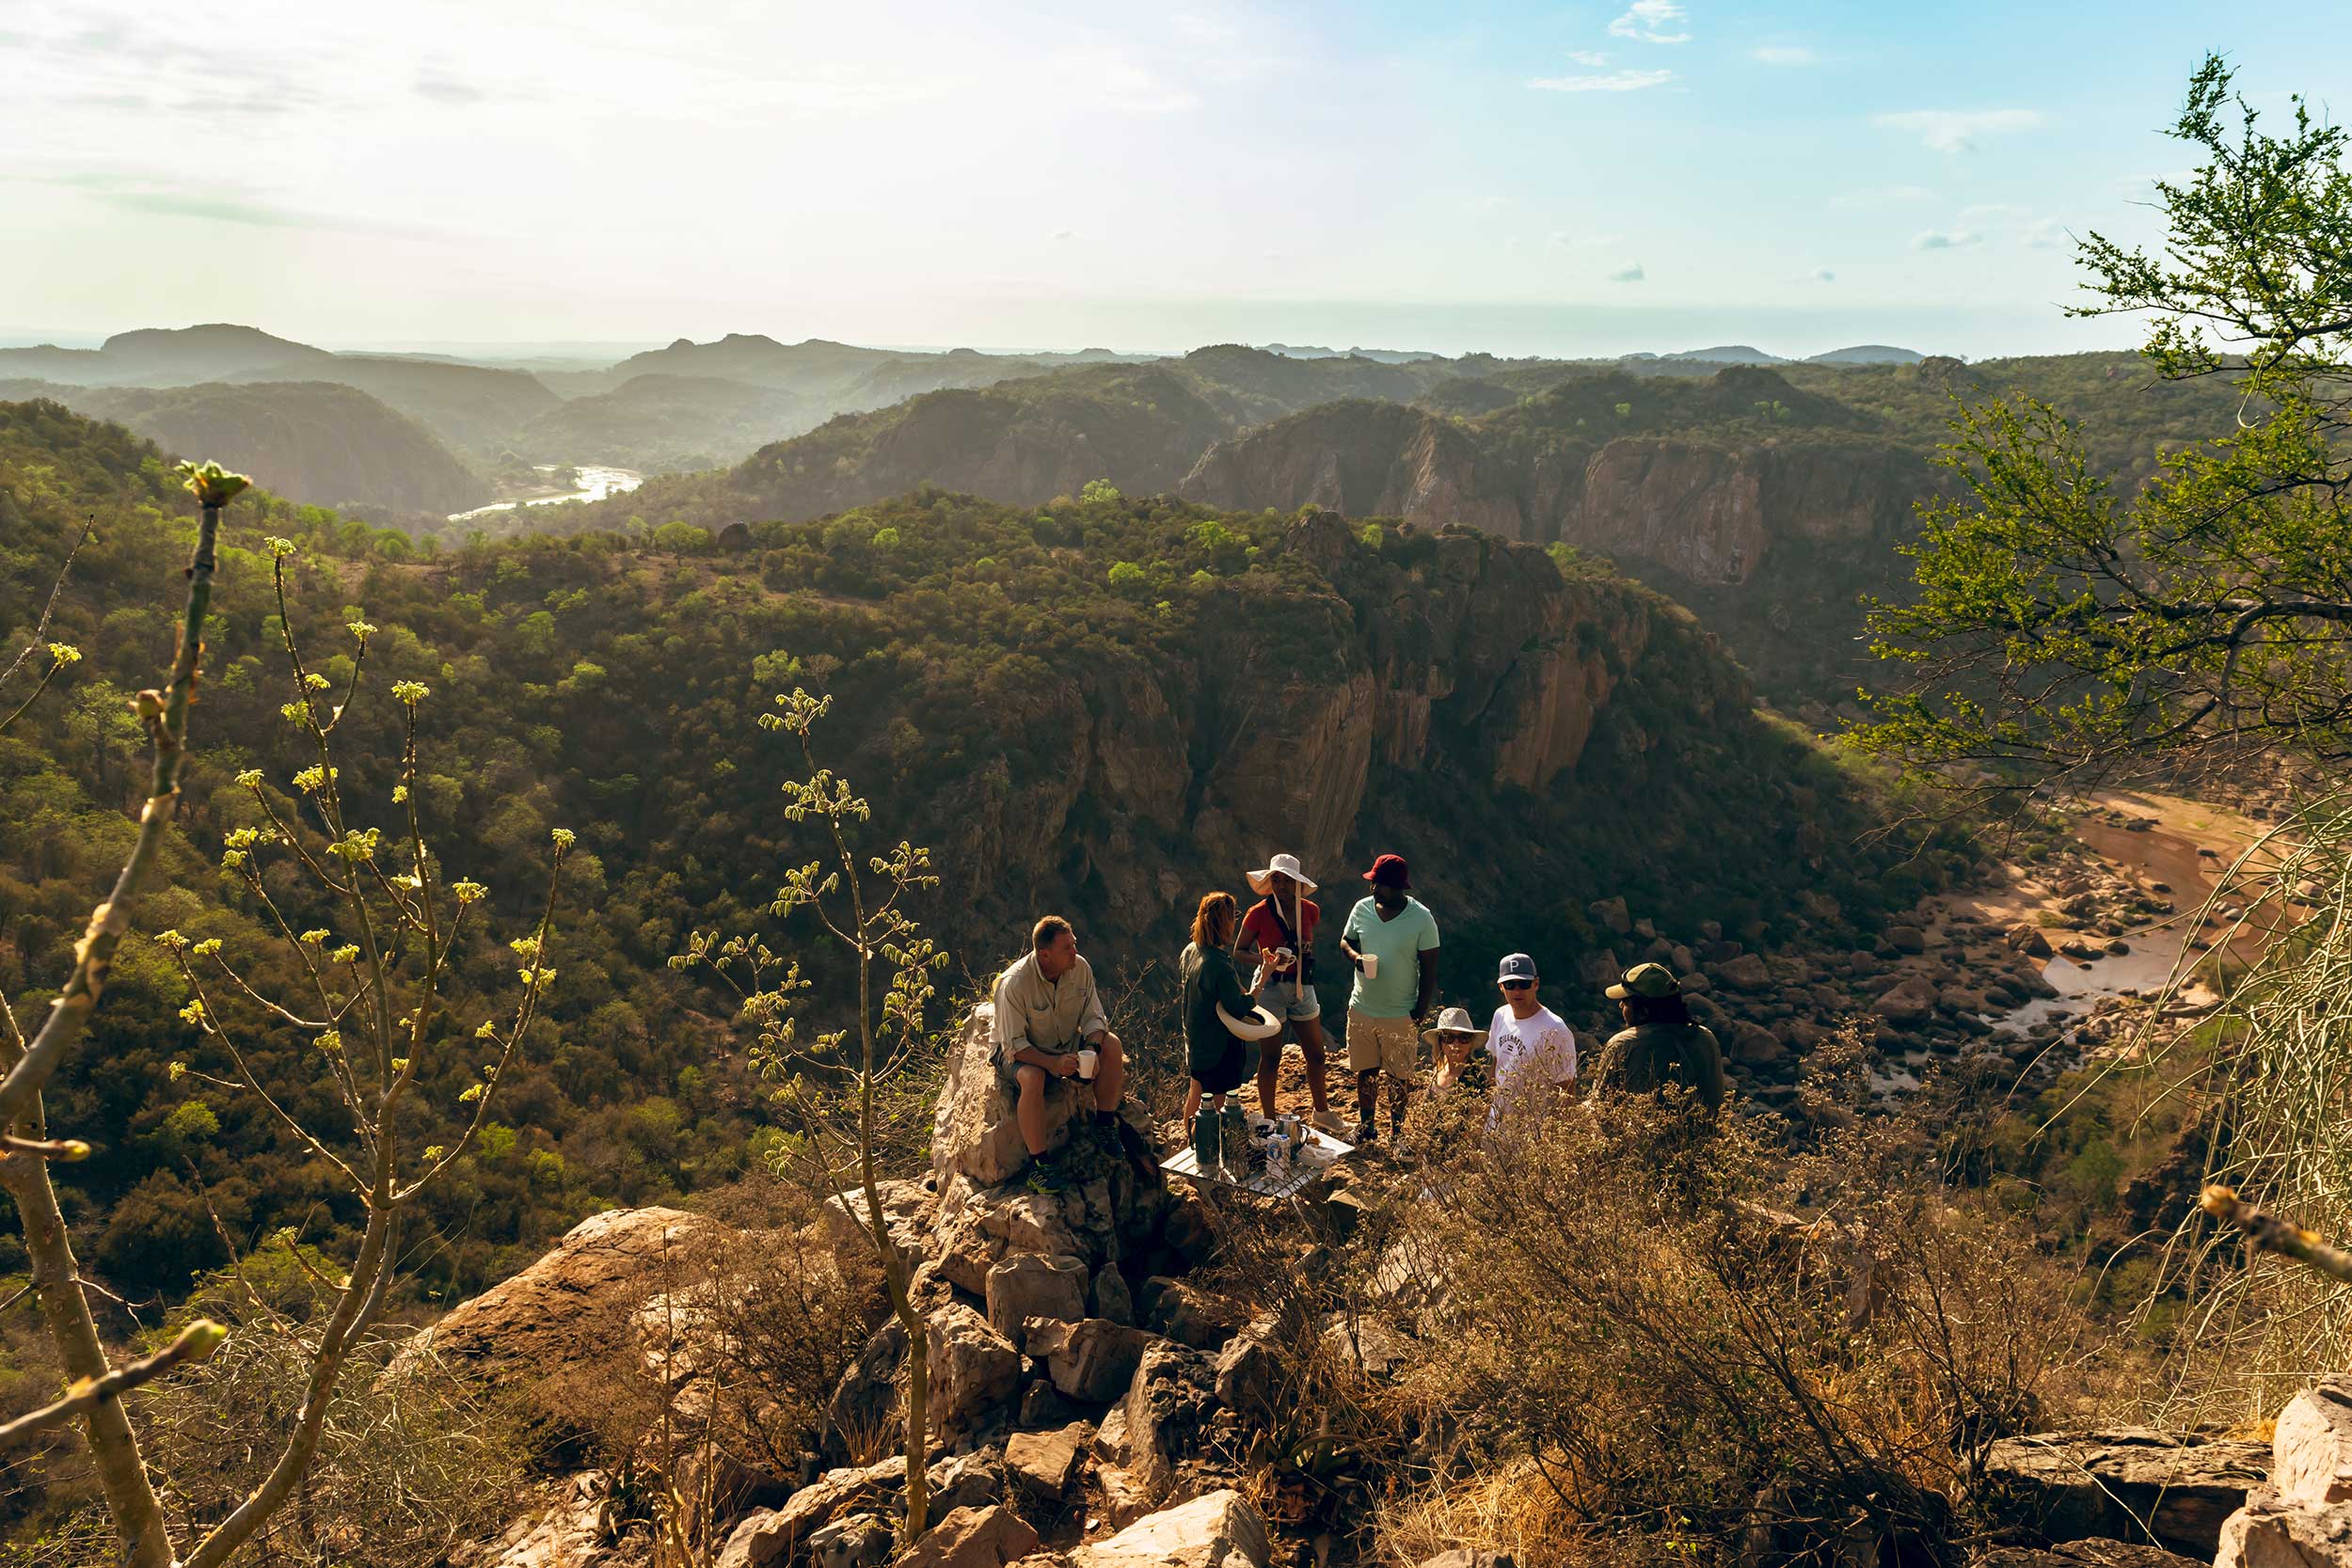 Group of people hiking on a rocky ridge with a scenic view of a lush valley, mountains, and a winding river in the background under a sunny sky